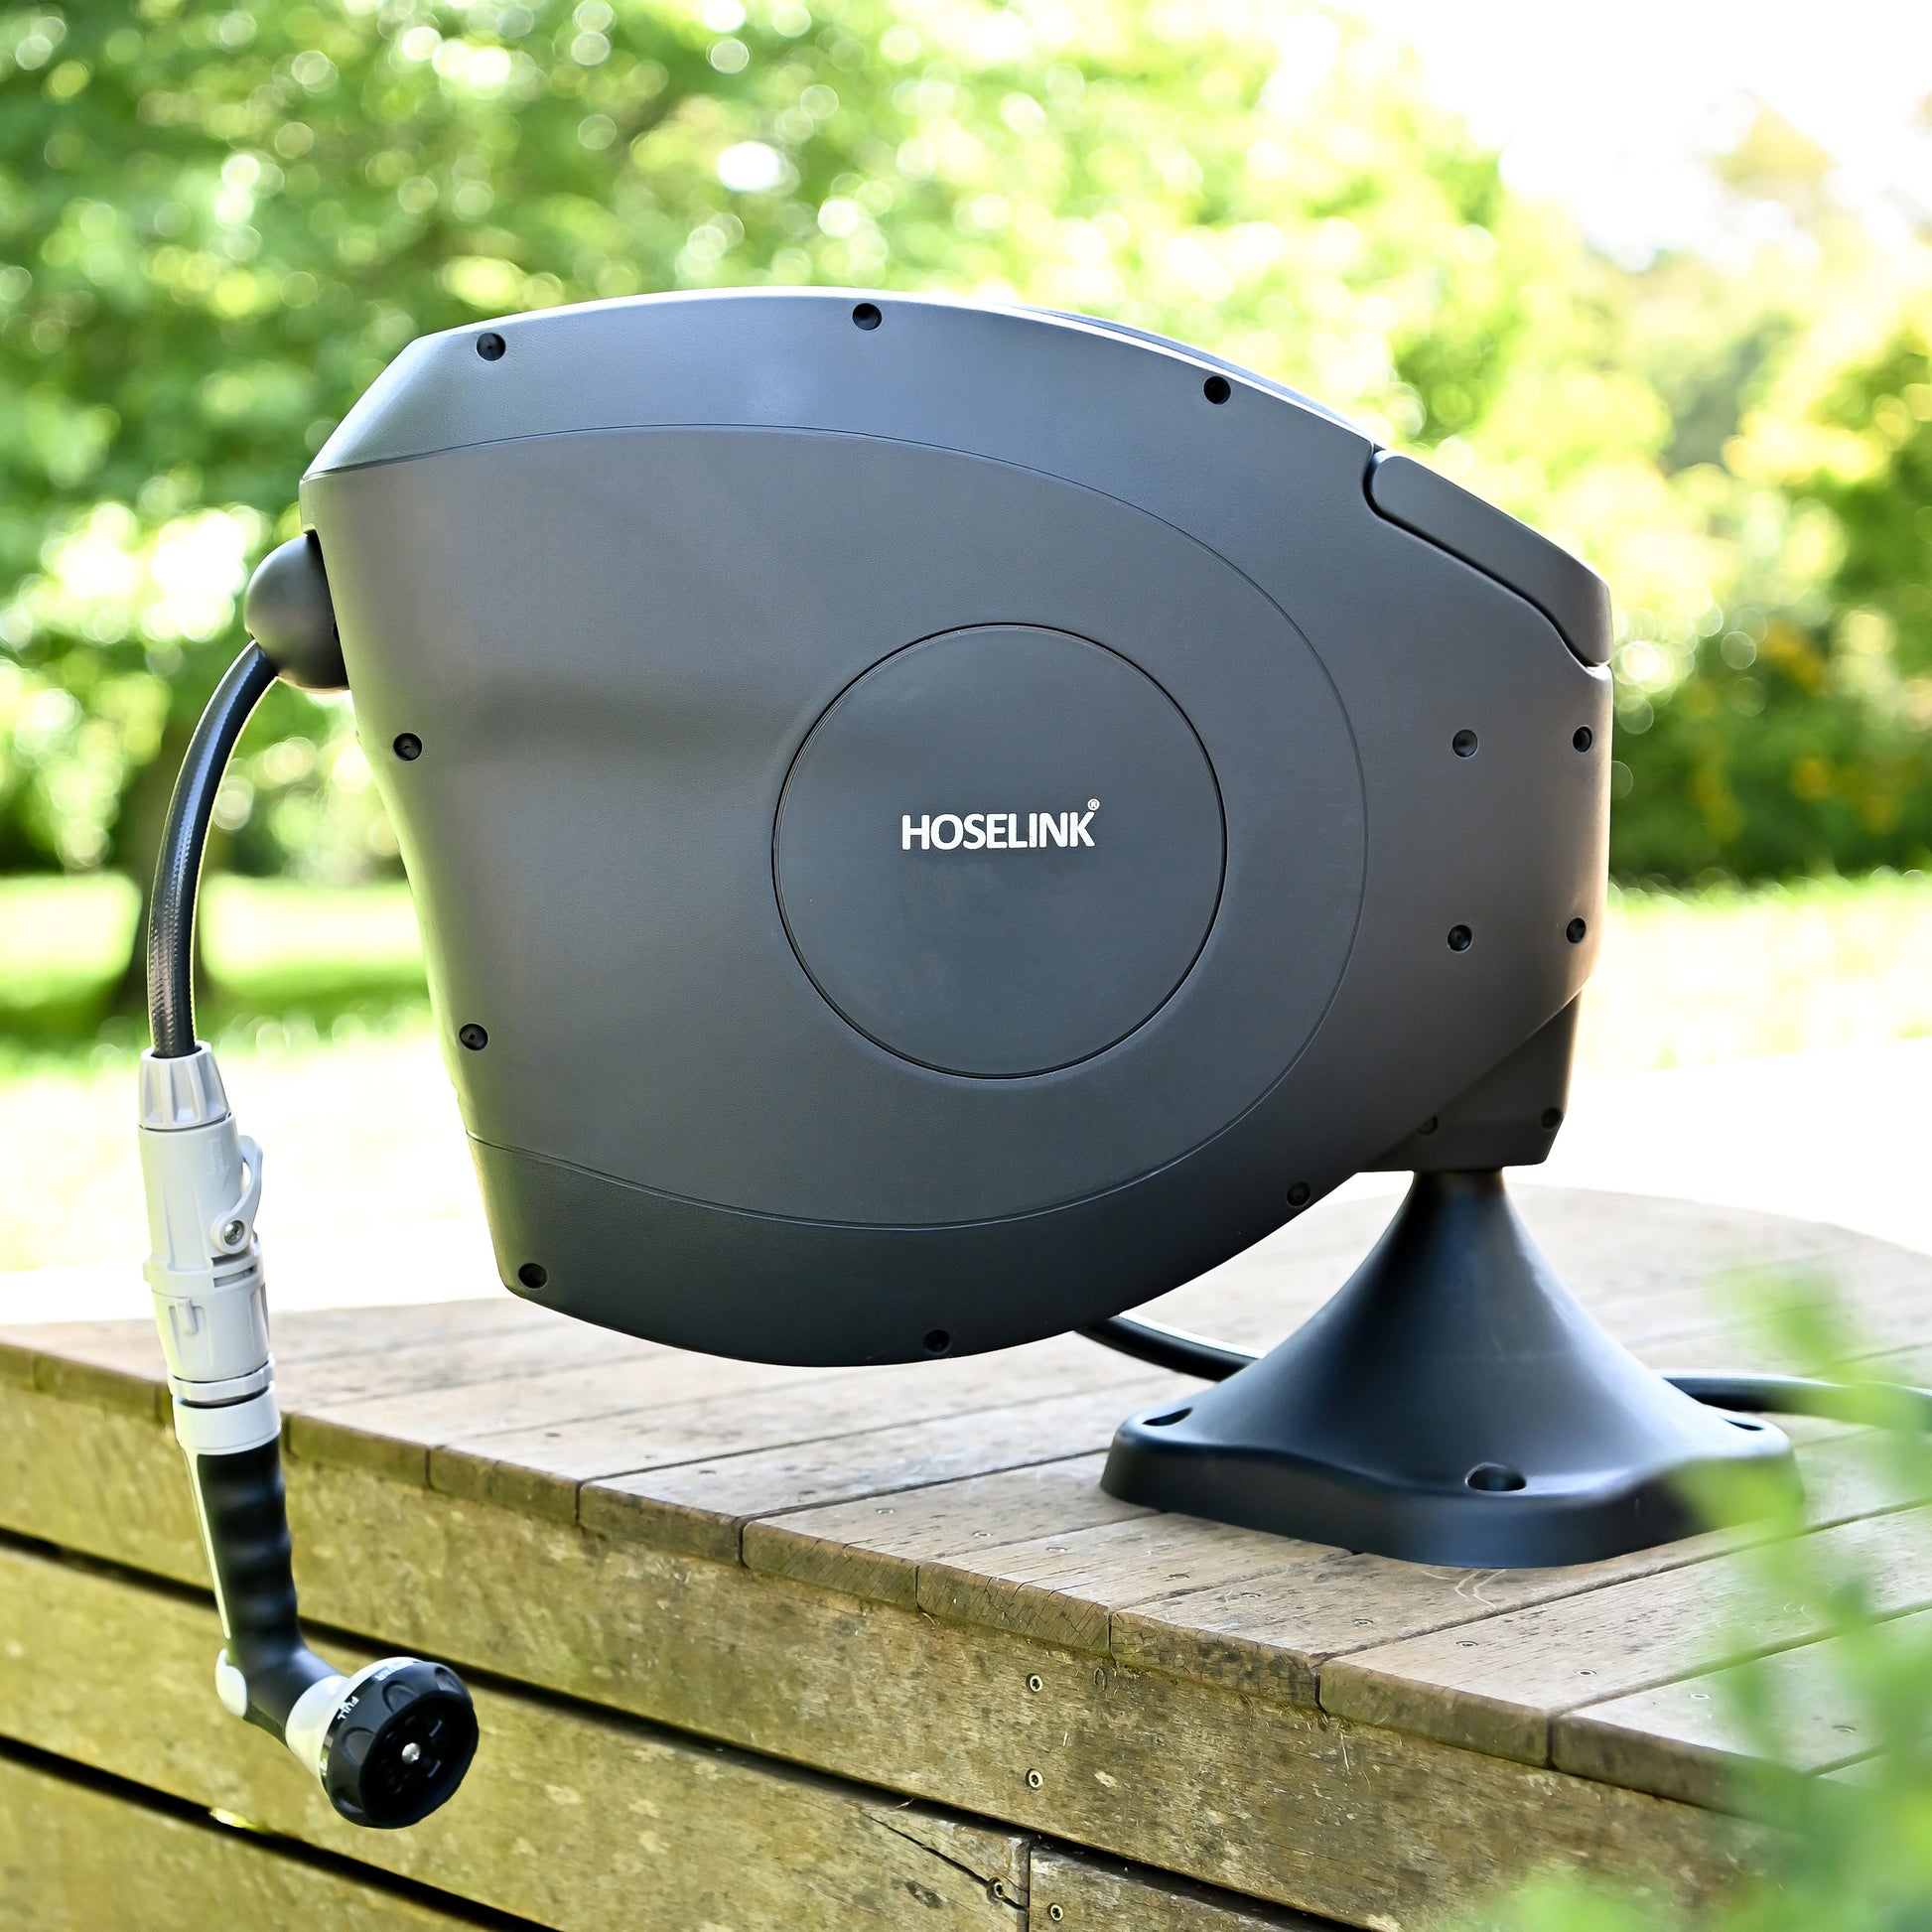 A Hoselink retractable reel mounted on a fixed ground mount on a timber deck, with greenery in the background.